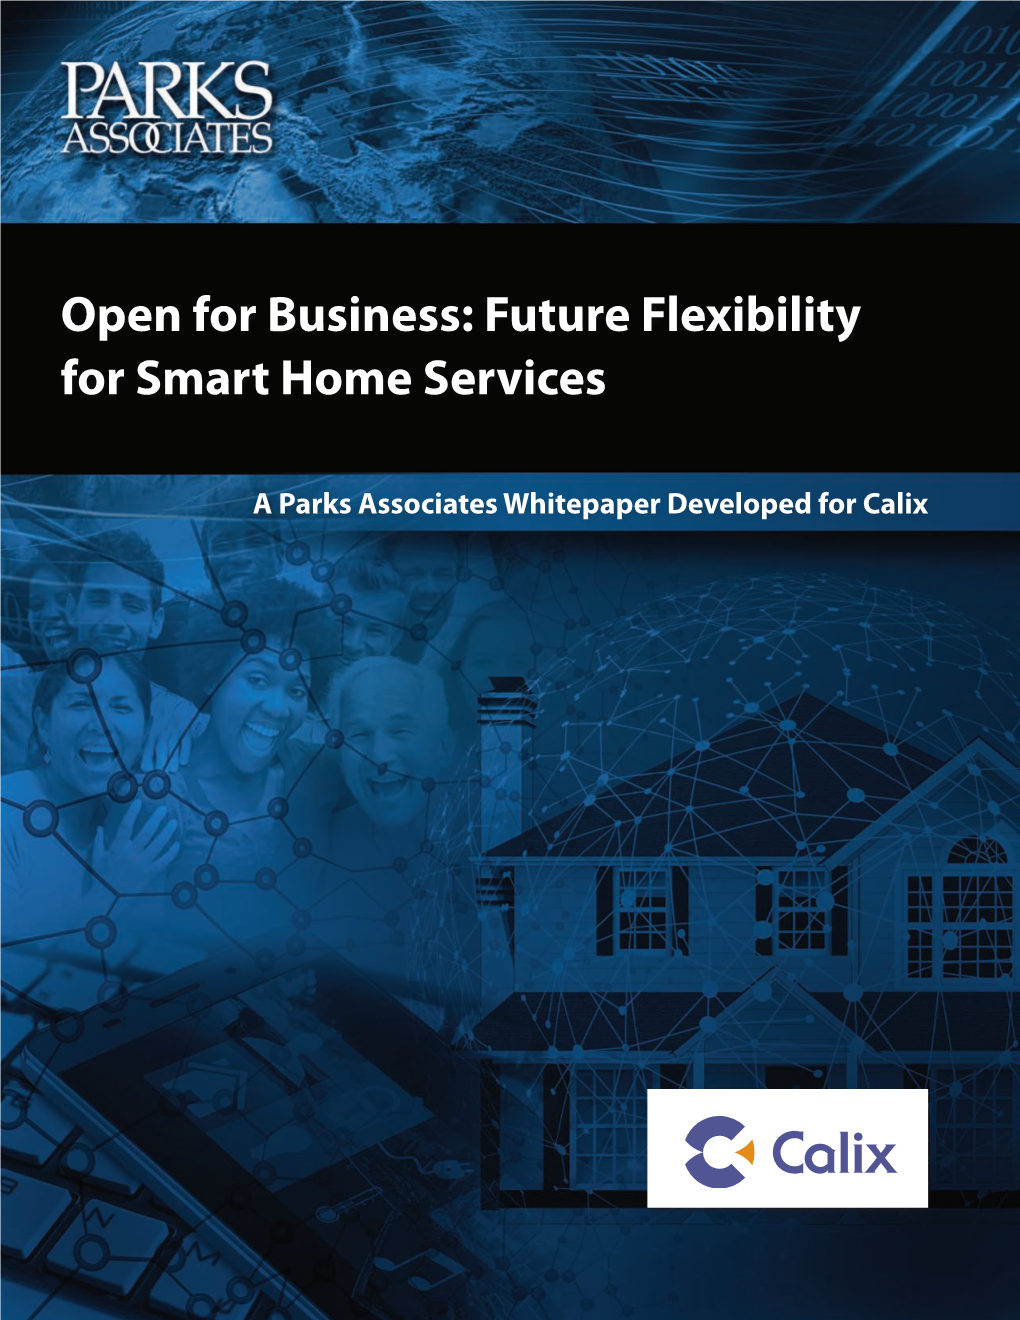 Open for Business: Future Flexibility for Smart Home Services